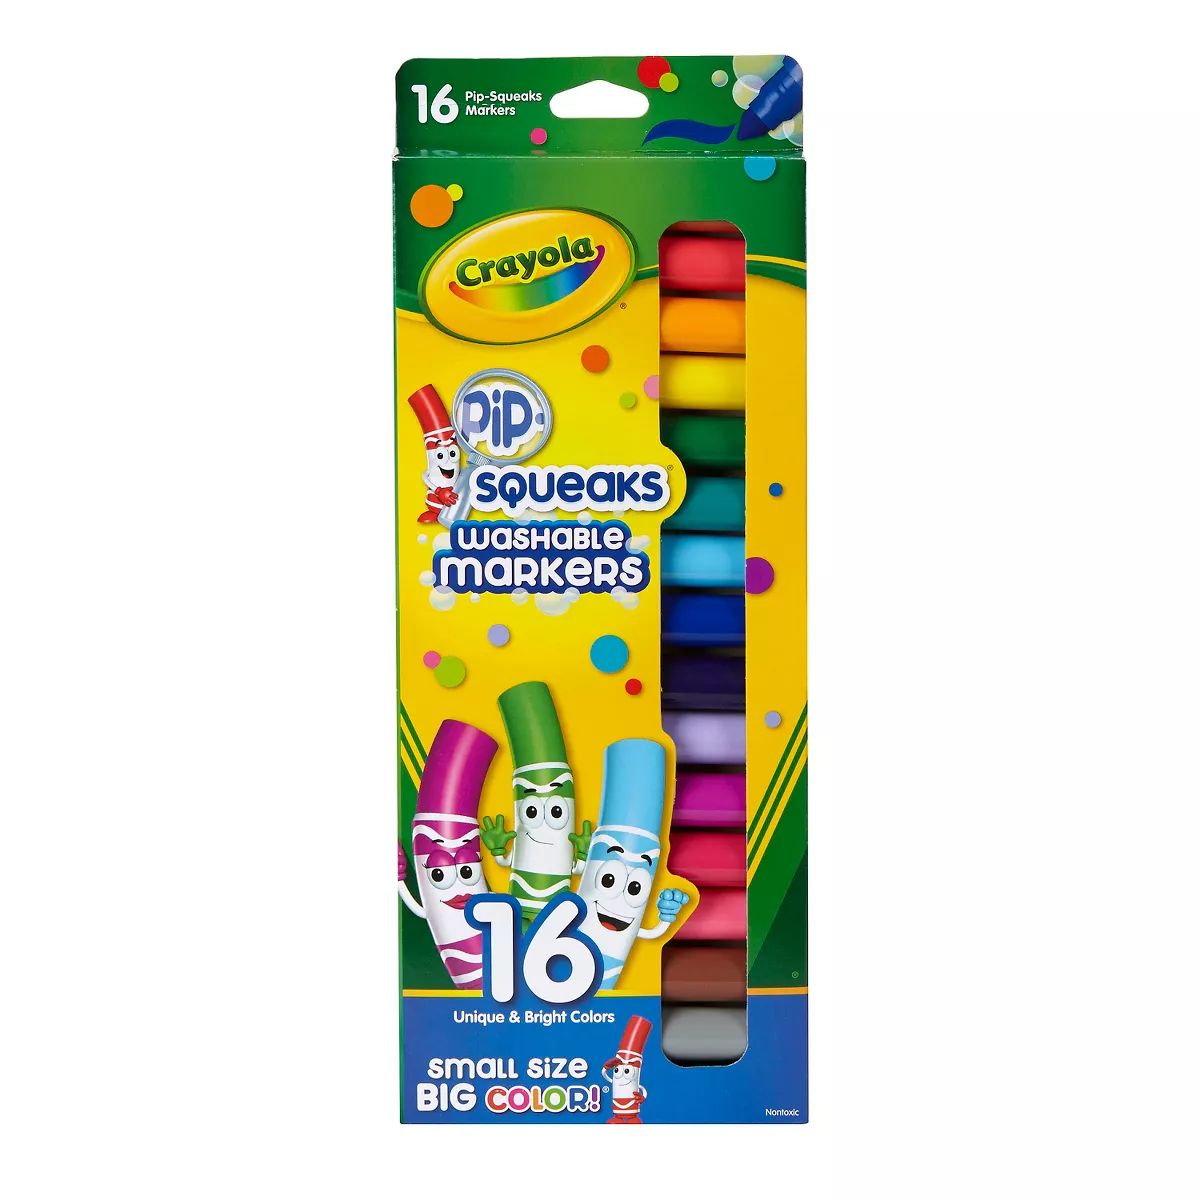 Crayola 16ct Pipsqueaks Washable Markers | Target